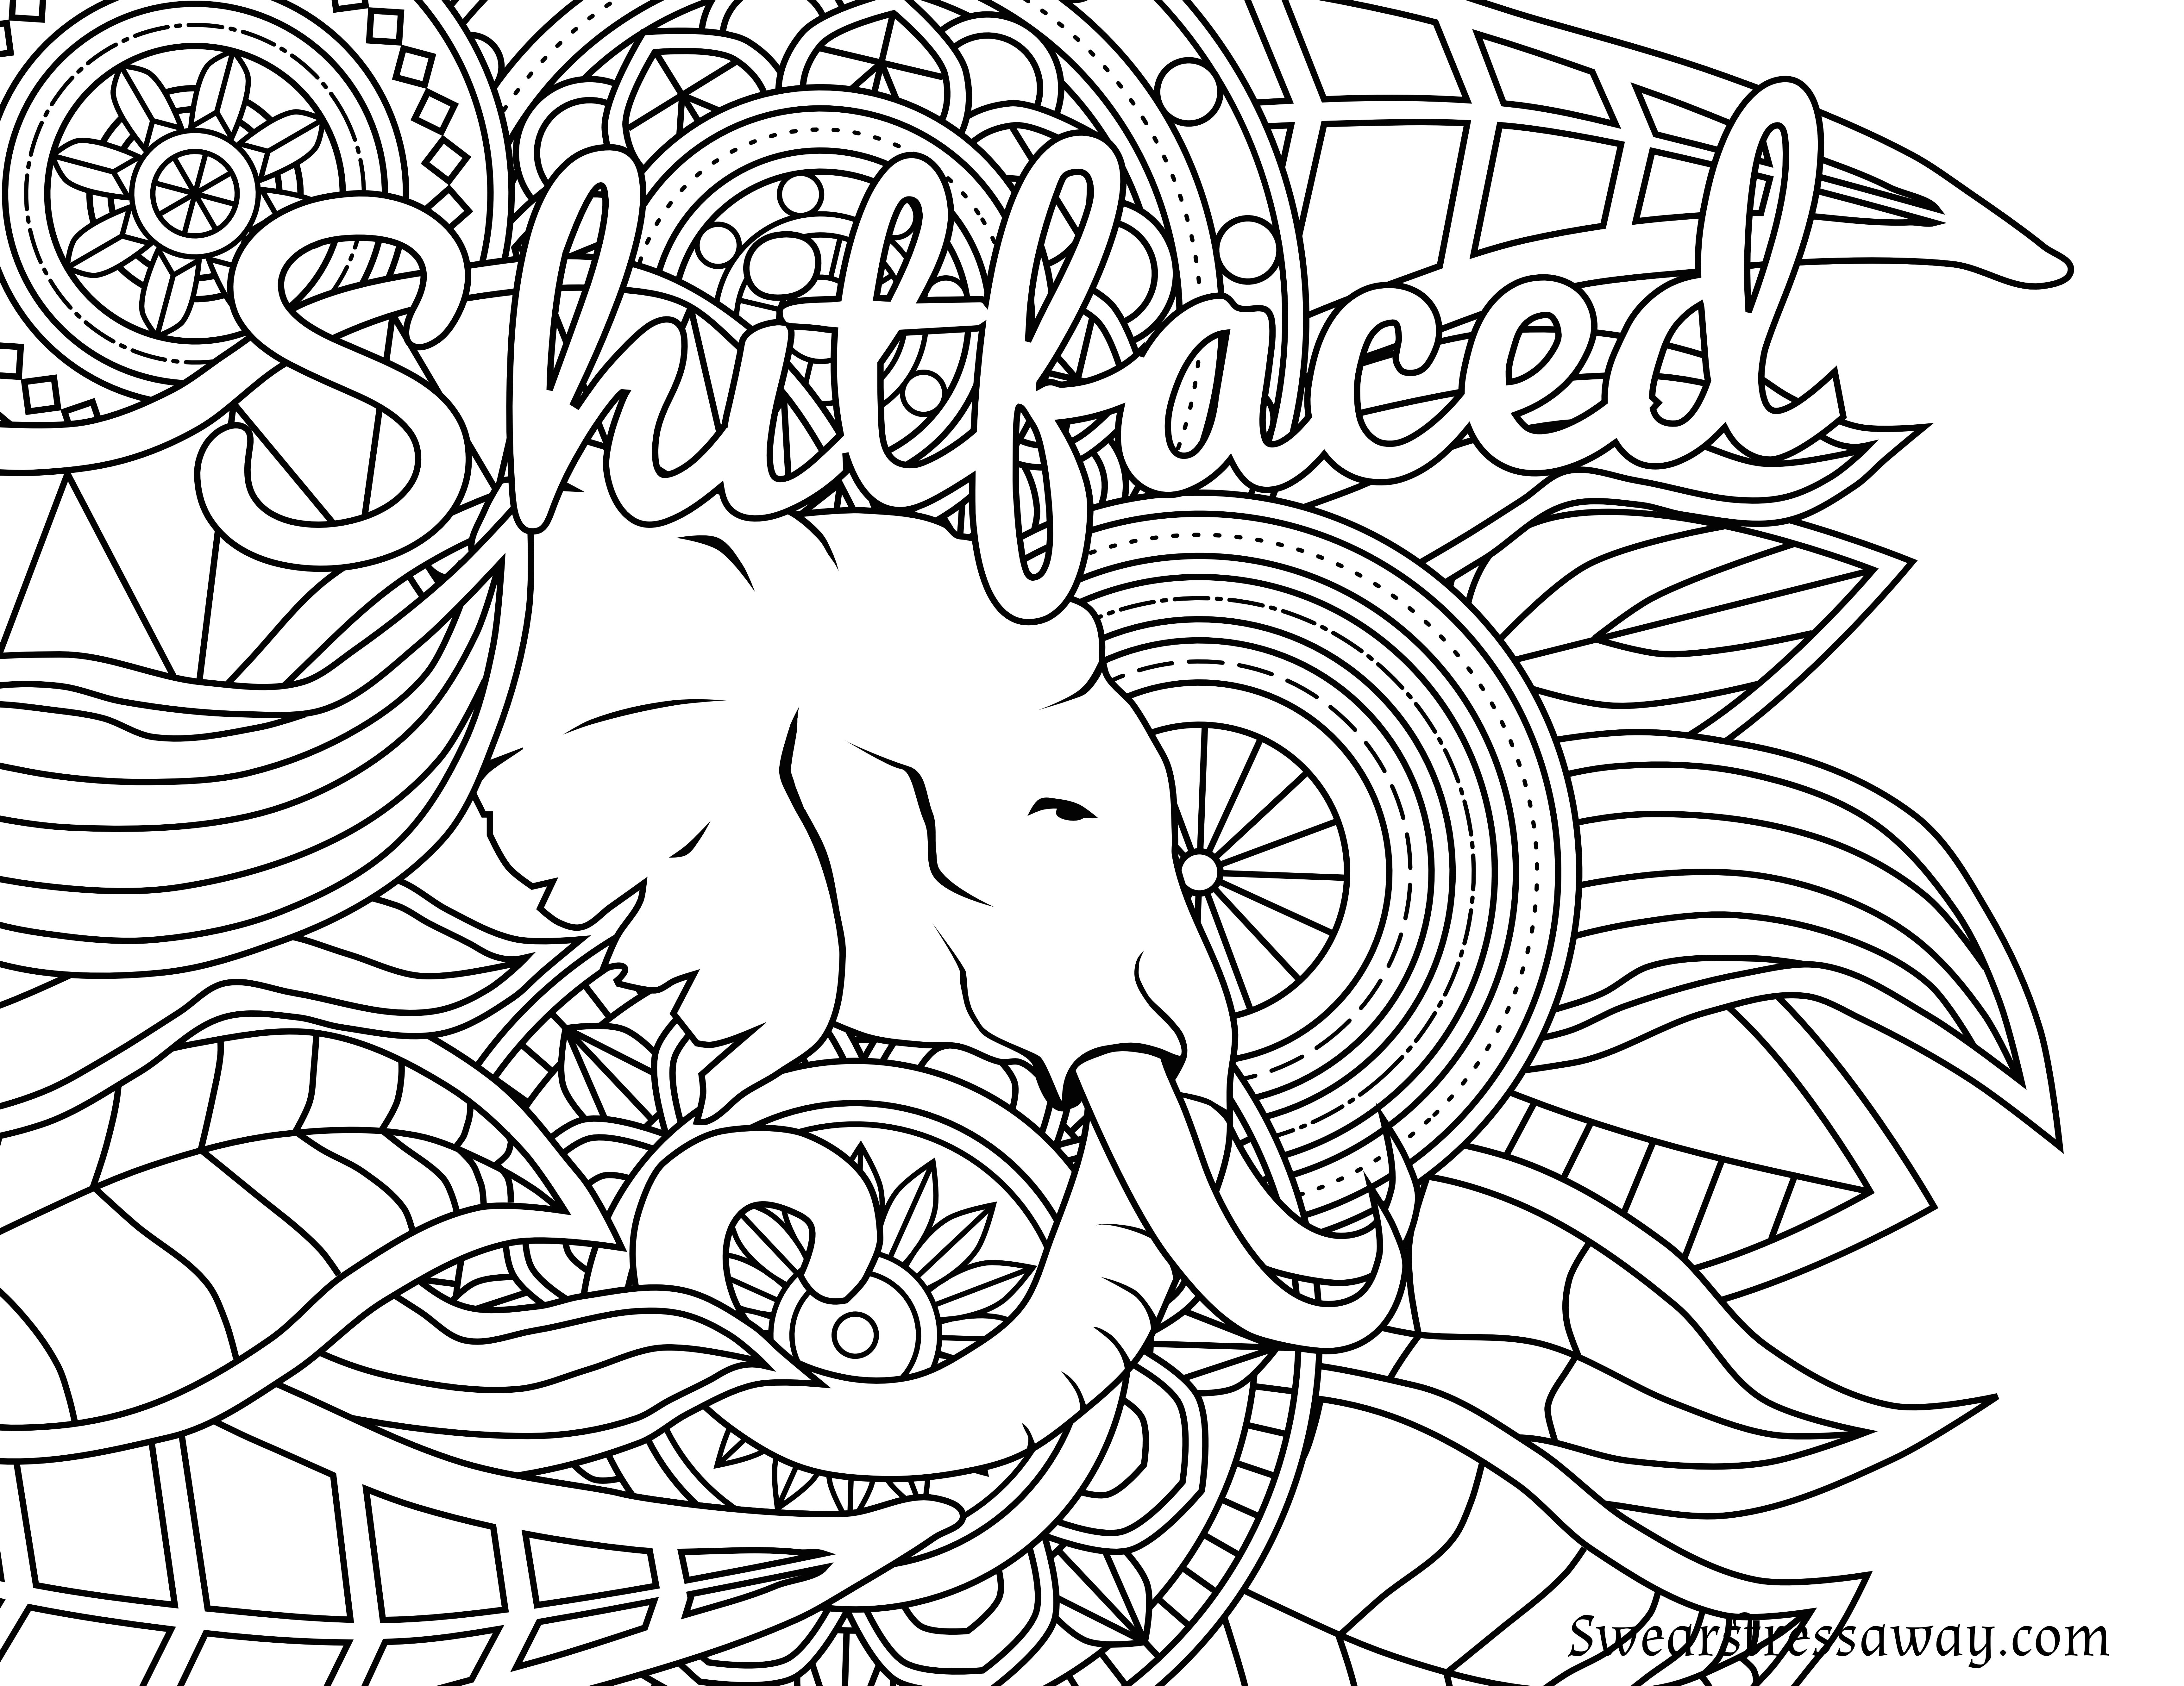 Free Printable Coloring Page - Shitfaced - Swear Word Coloring Page - Swear Word Coloring Pages Printable Free